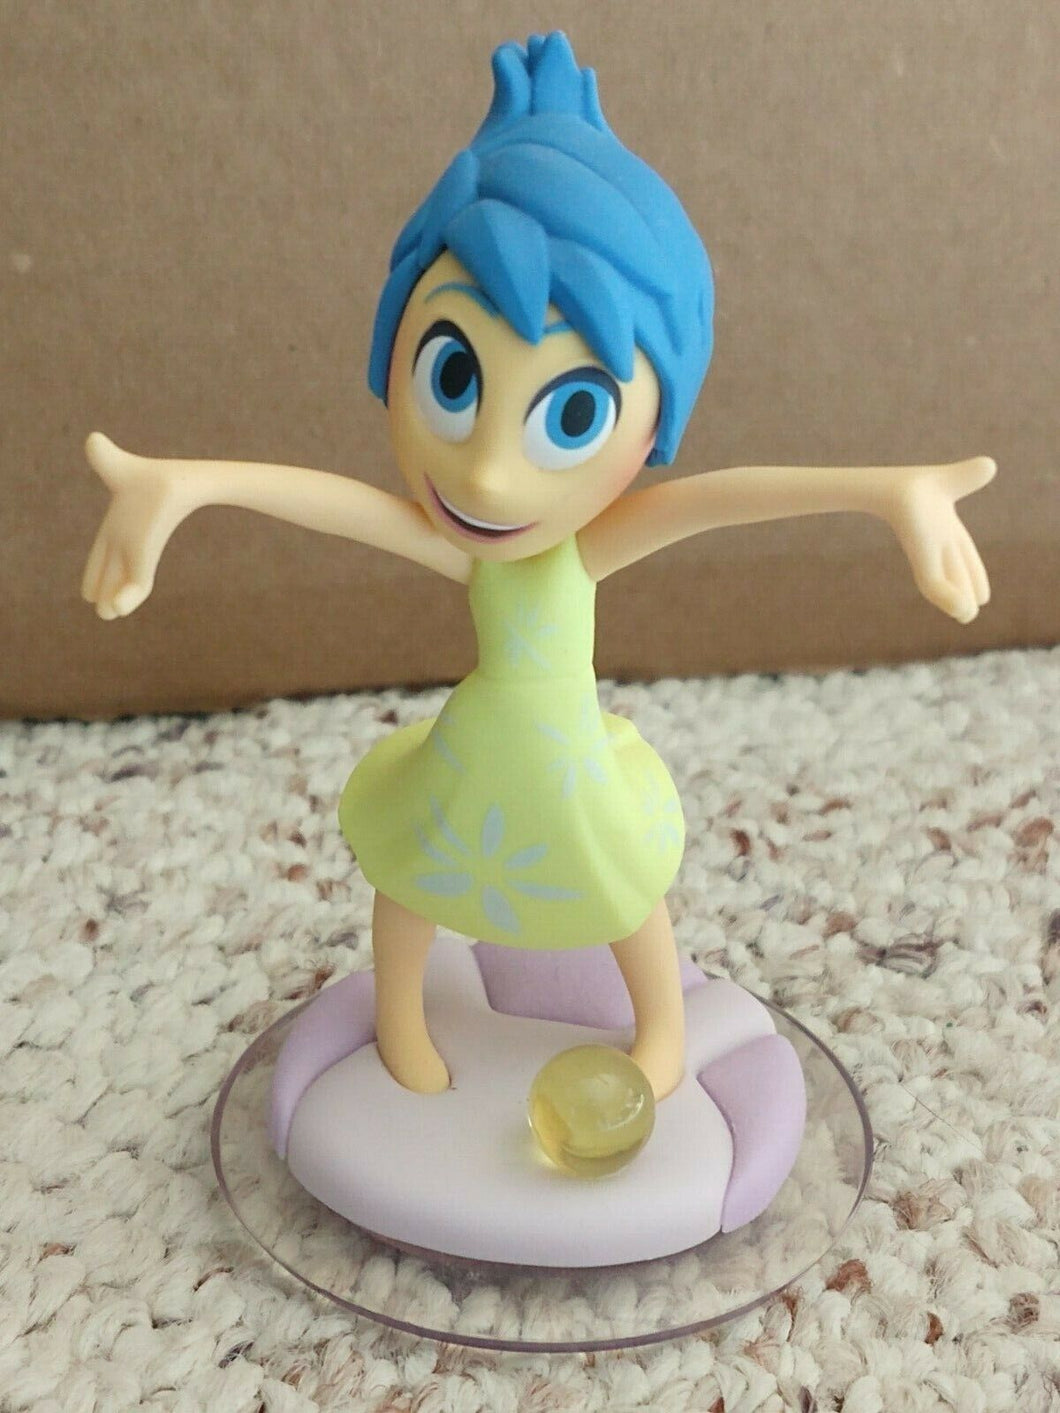 Disney Infinity 3.0 Play Set Lot - Inside Out Joy & Anger (SEE BOTH PHOTOS)